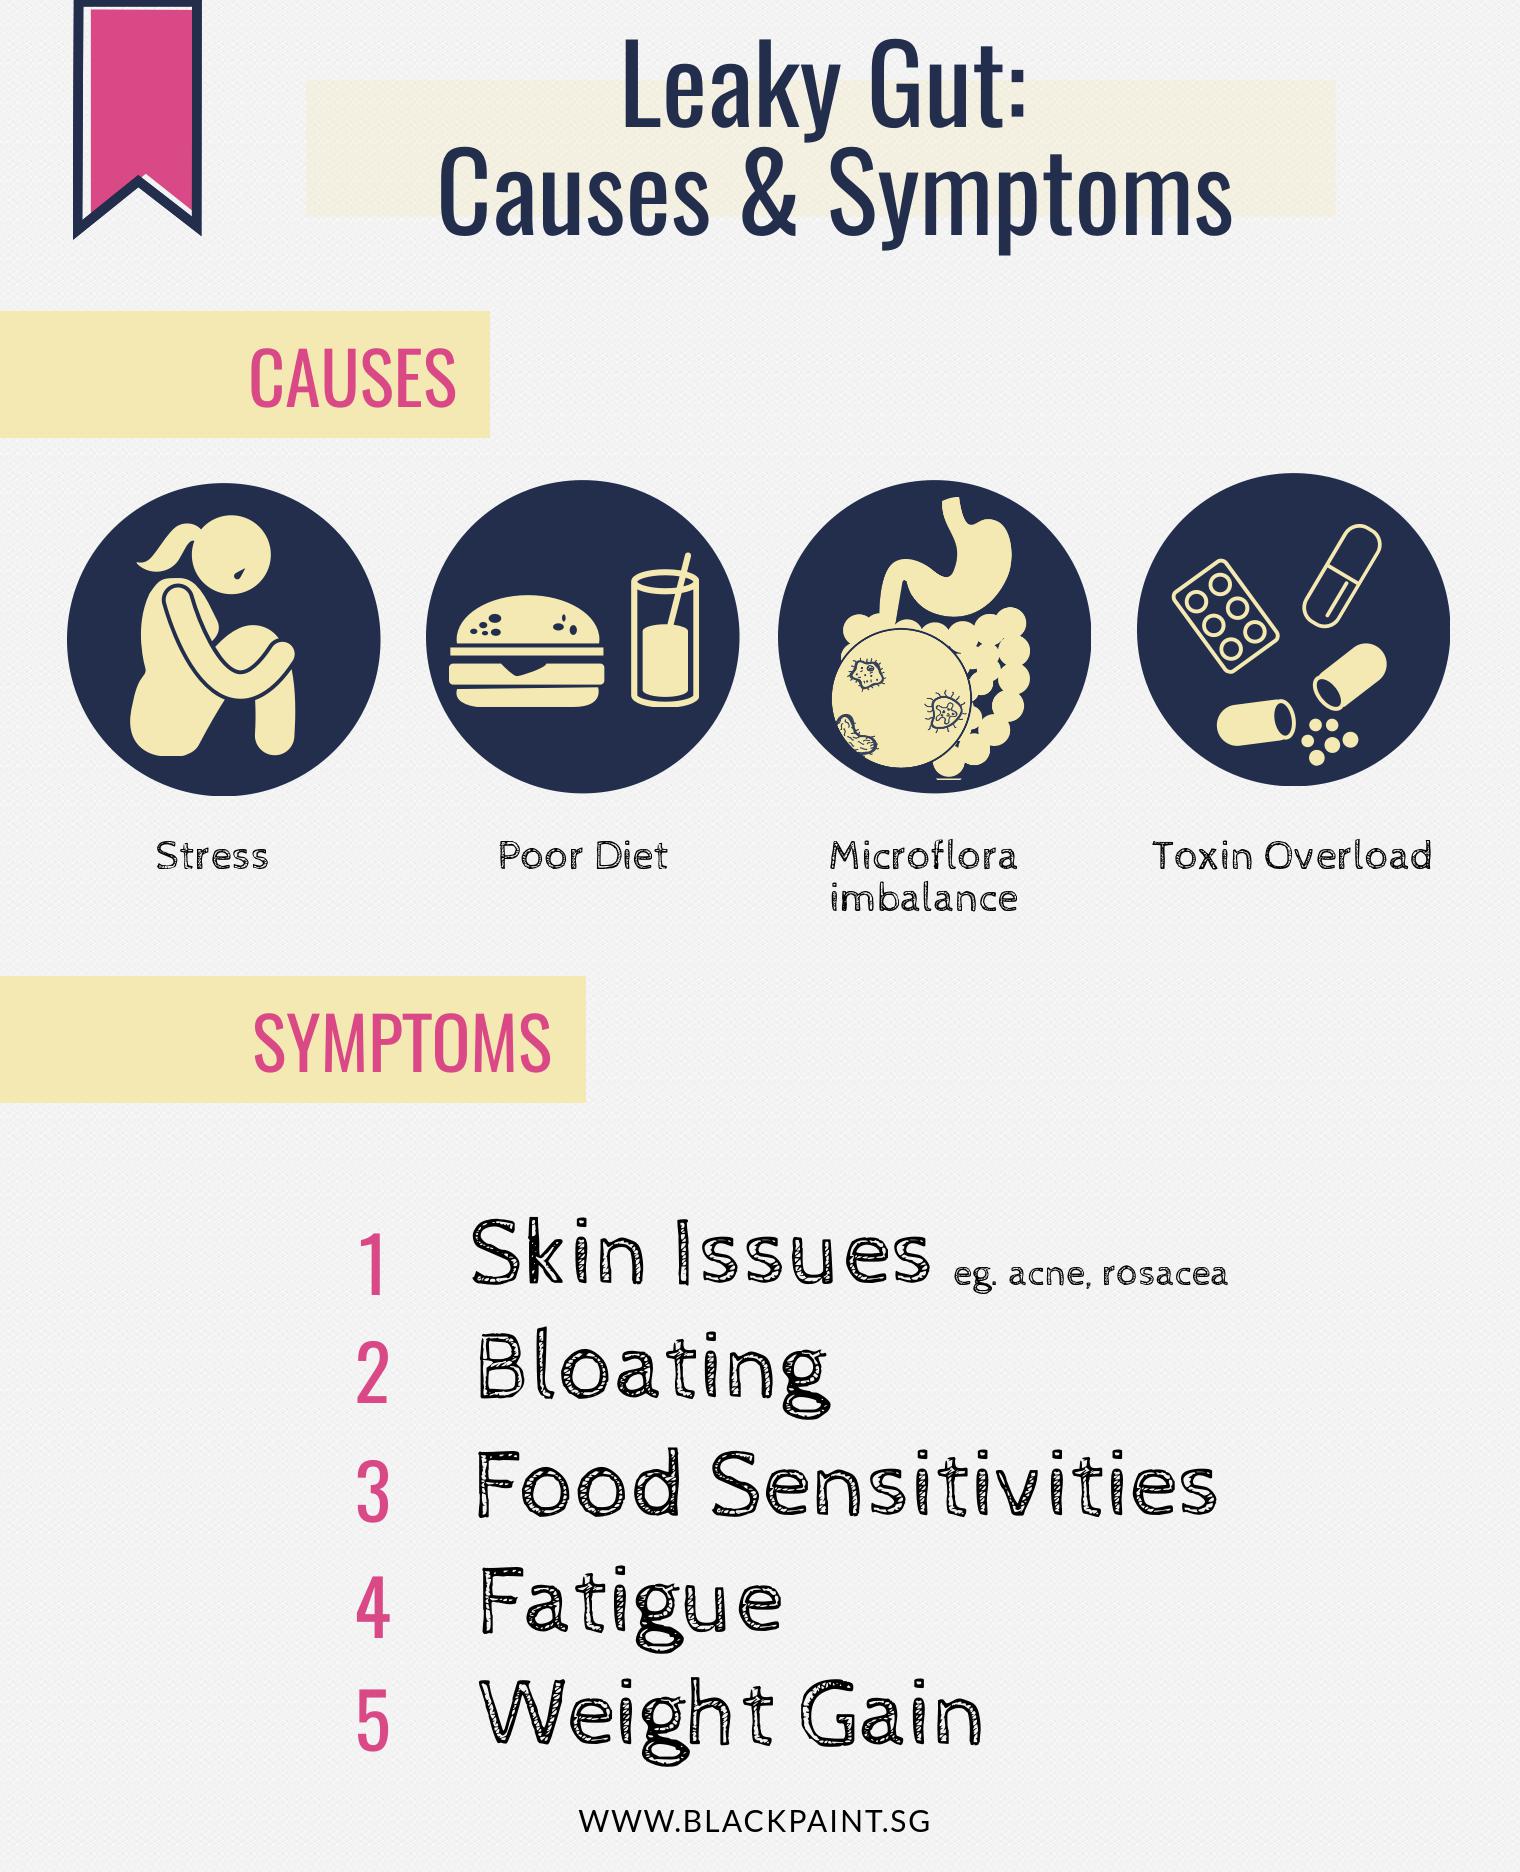 illustration of leaky gut causes and symptoms